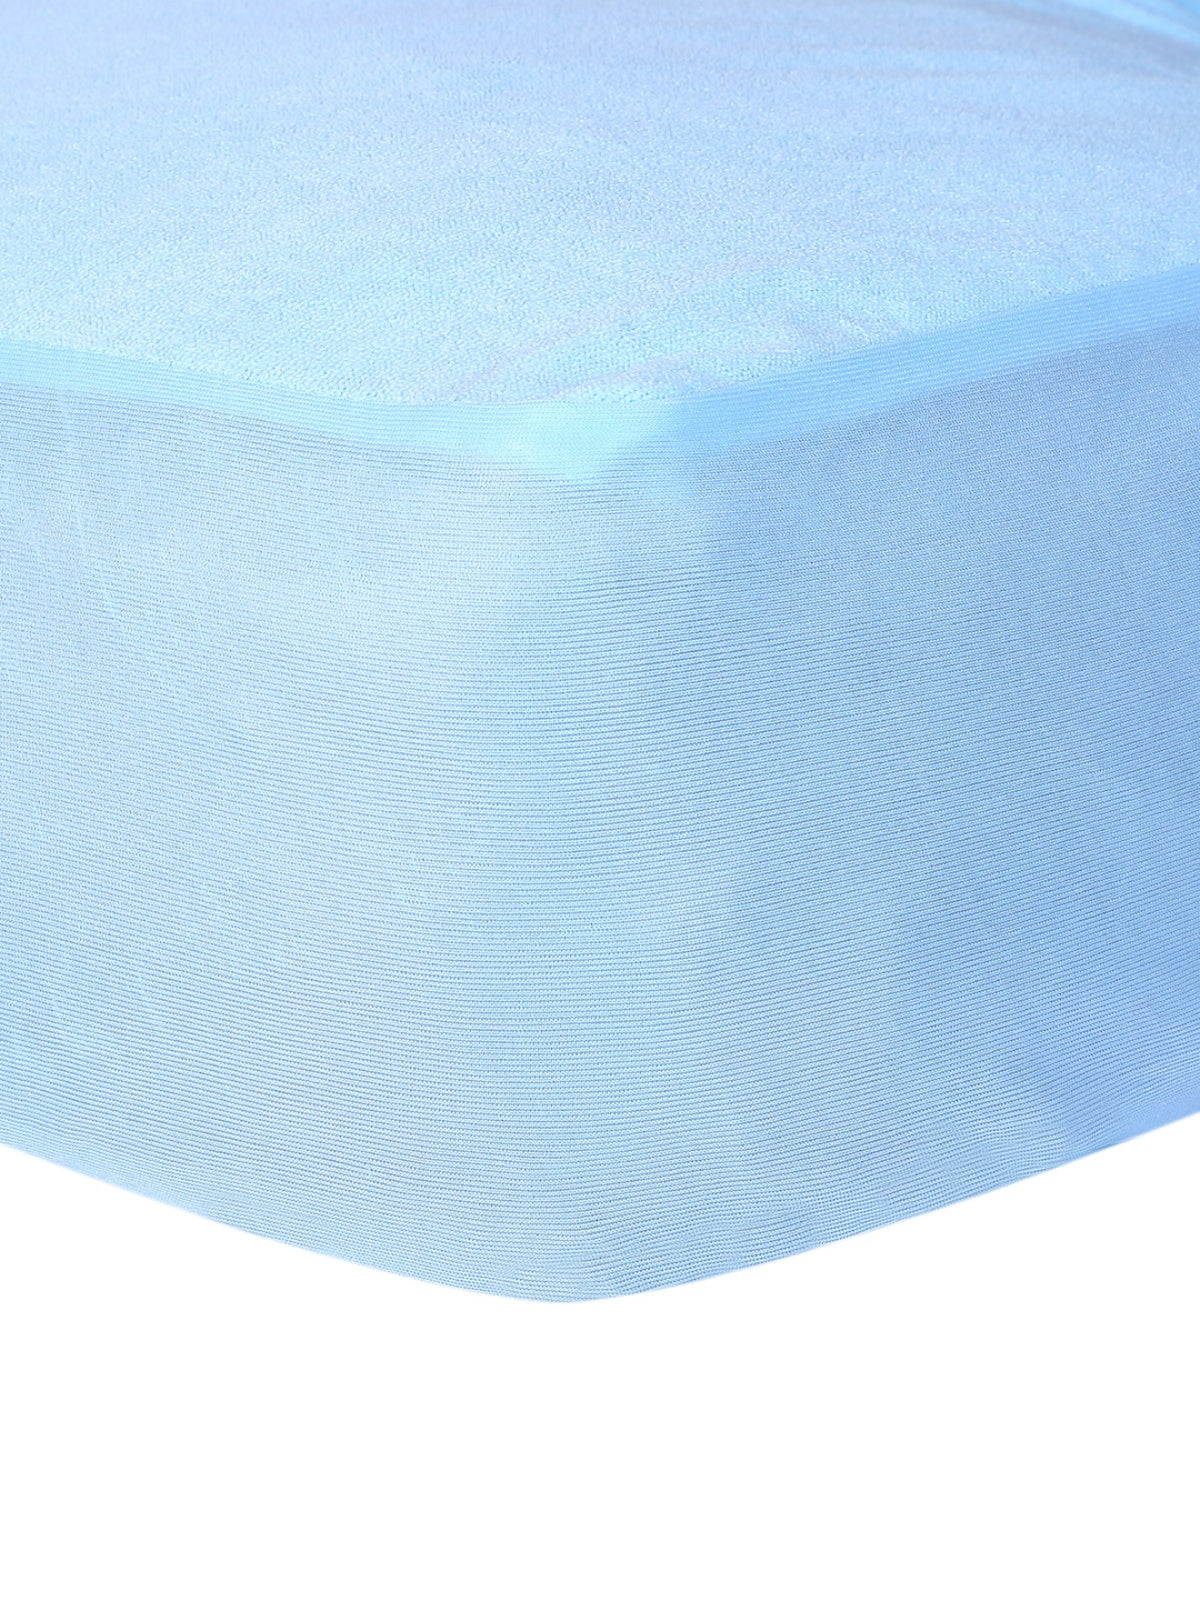 Aqua Blue Terry Cloth Waterproof Mattress Protector for King Size